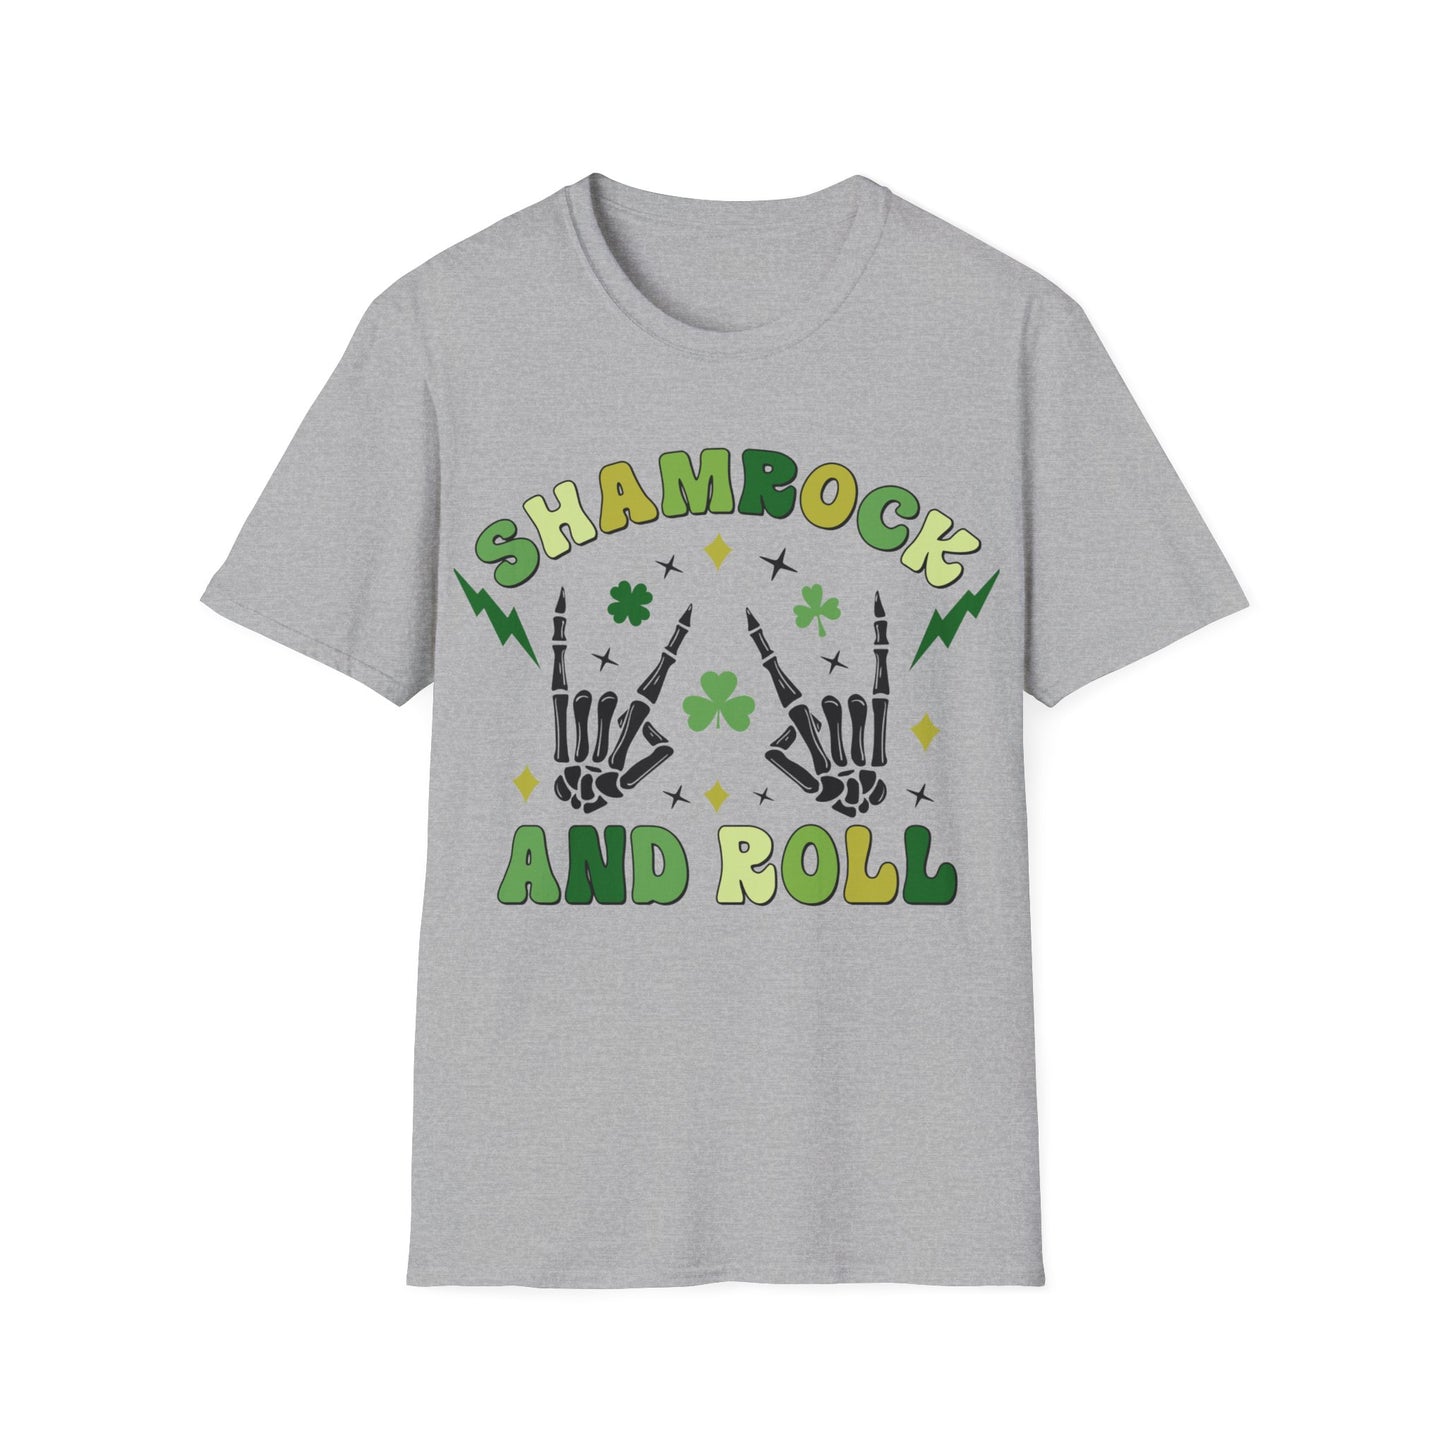 Shamrock and Roll Funny St. Patty's Day Retro T-Shirt